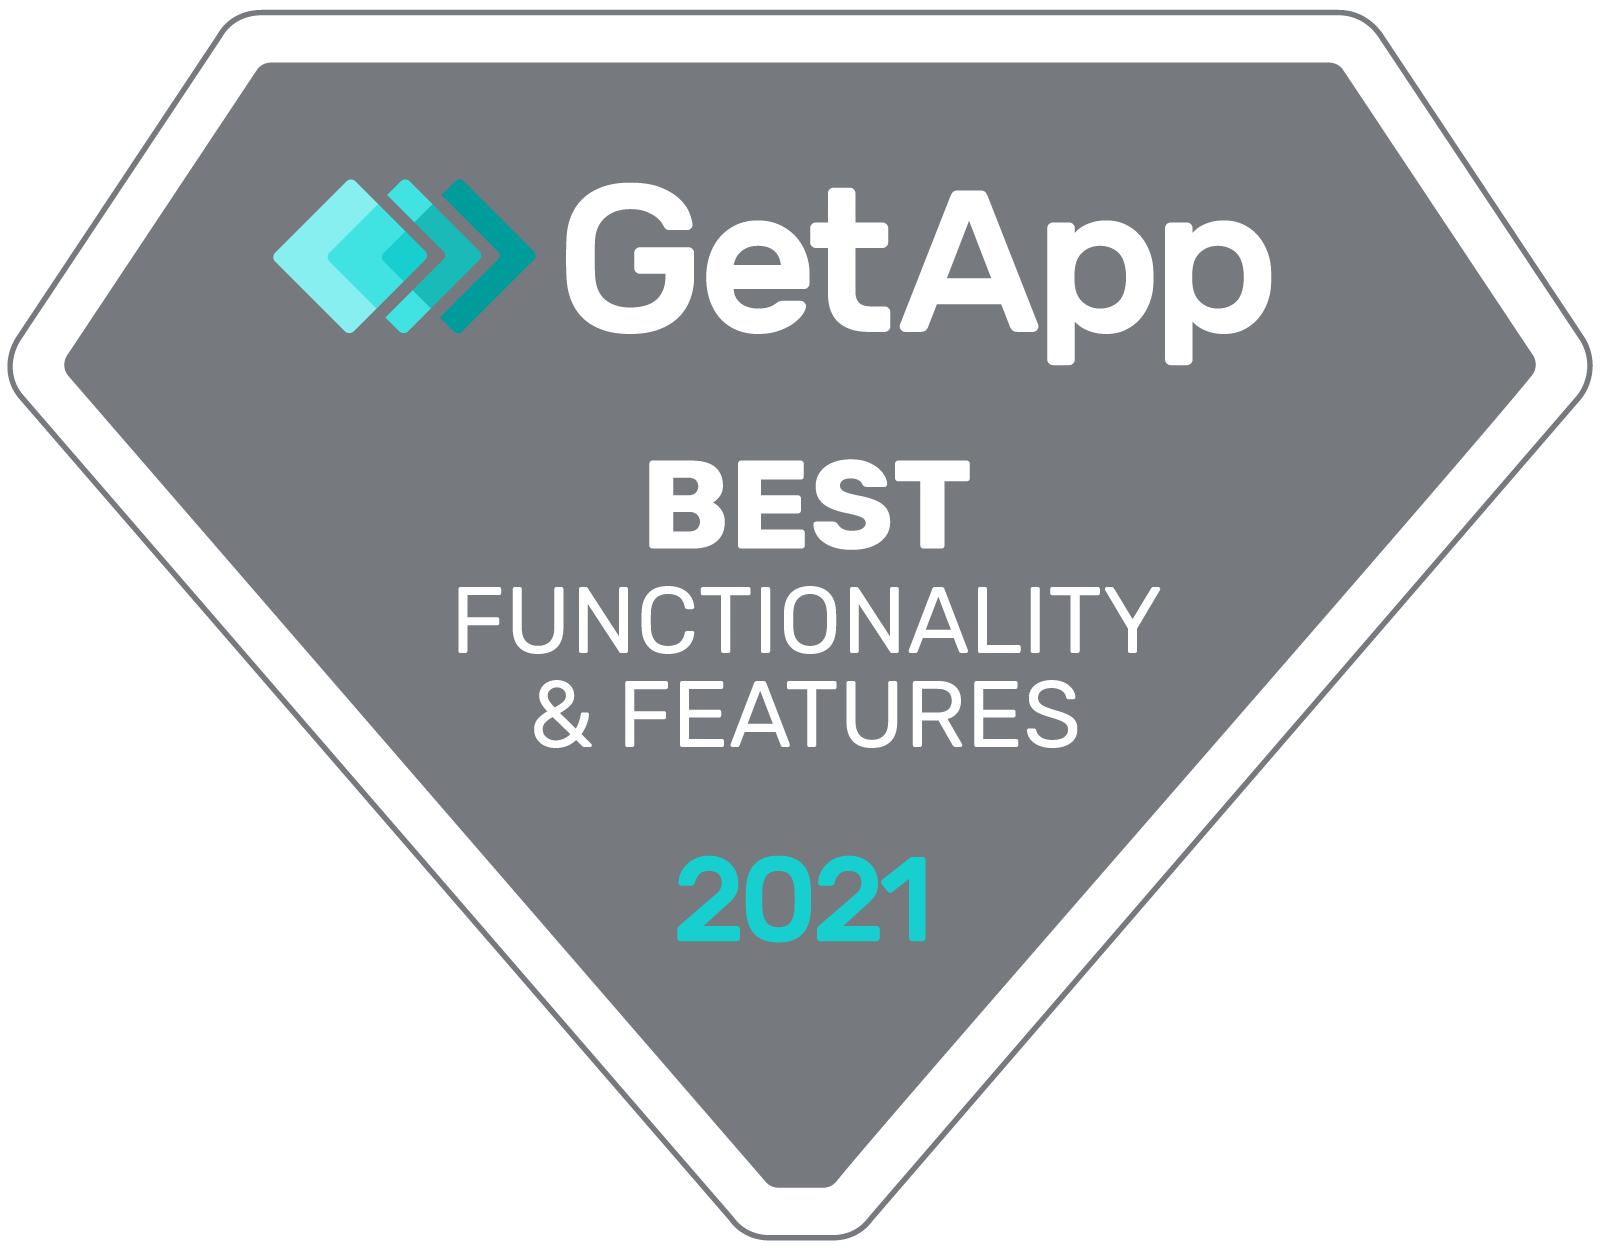 GetApp best functionality and features 2021 badge